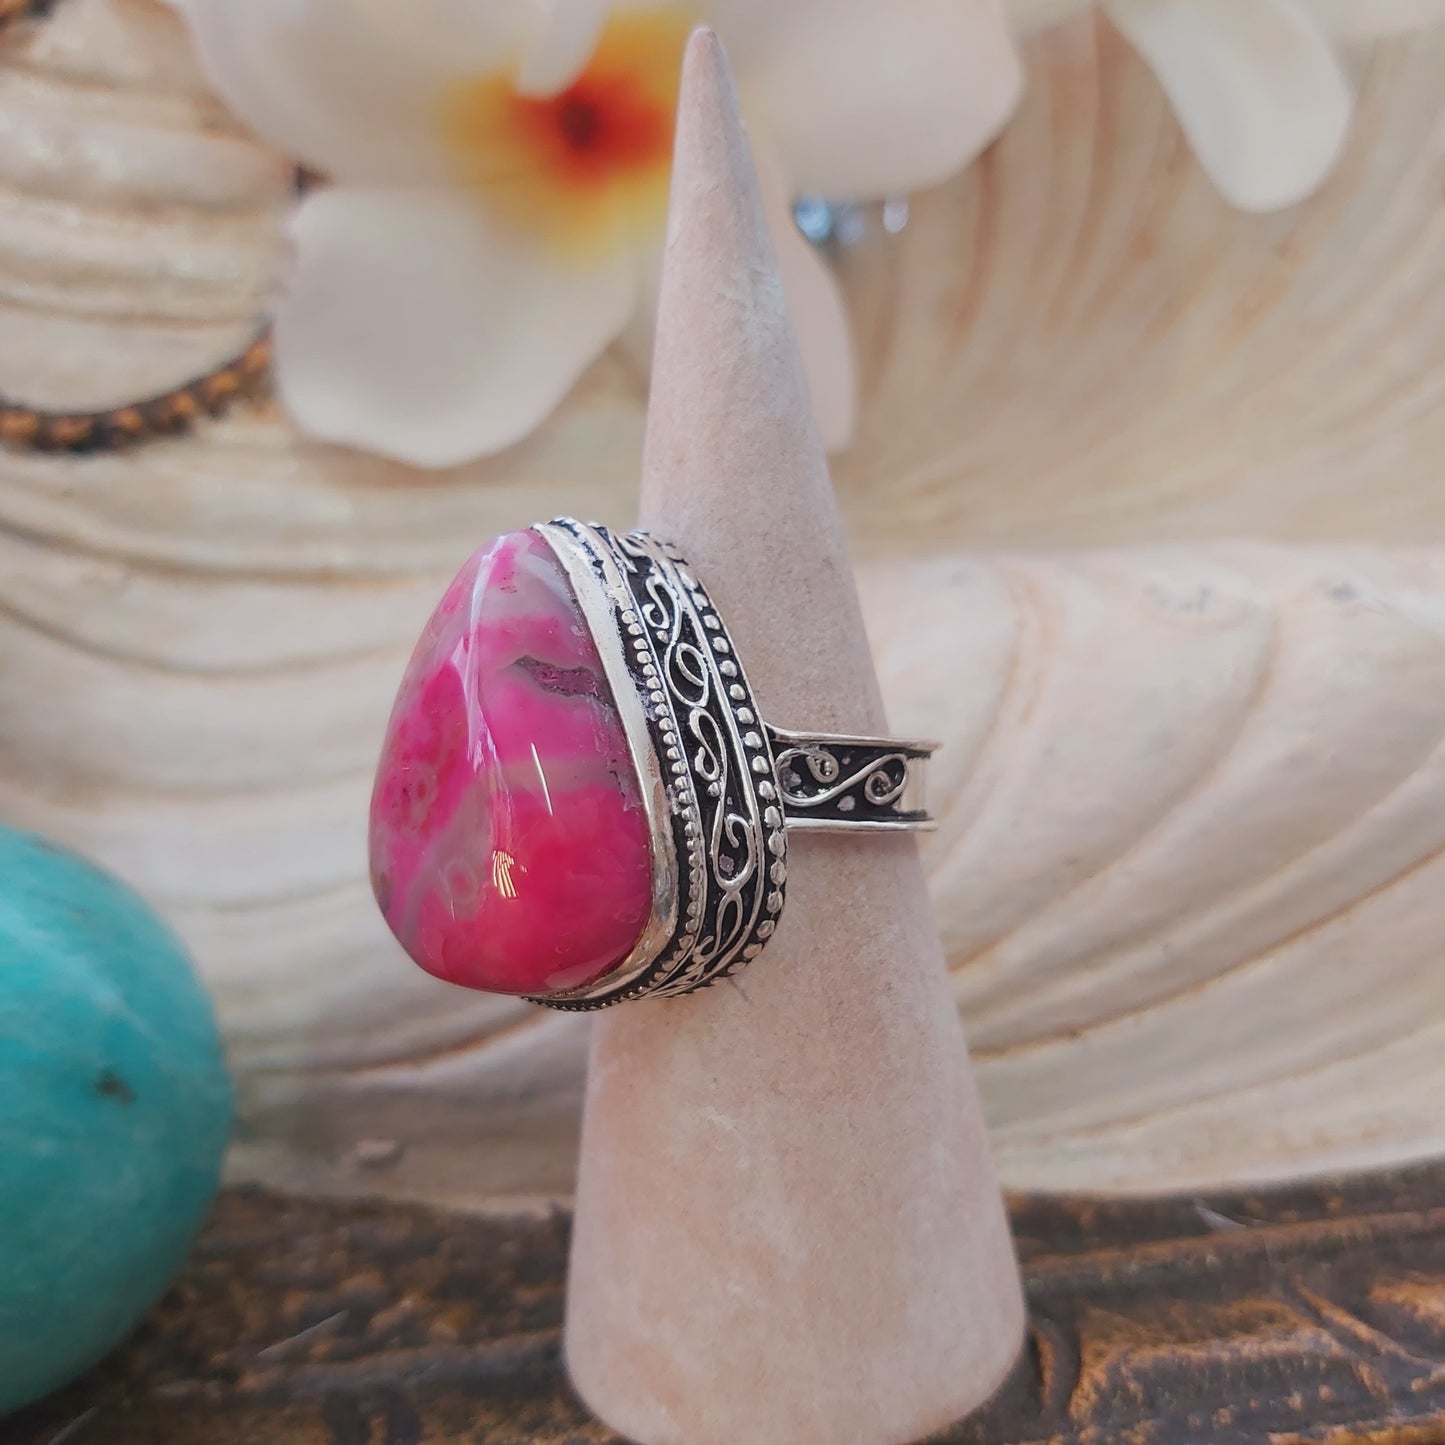 Agate Physical Wellbeing Gemstone Ring US 9.5 (E2219)